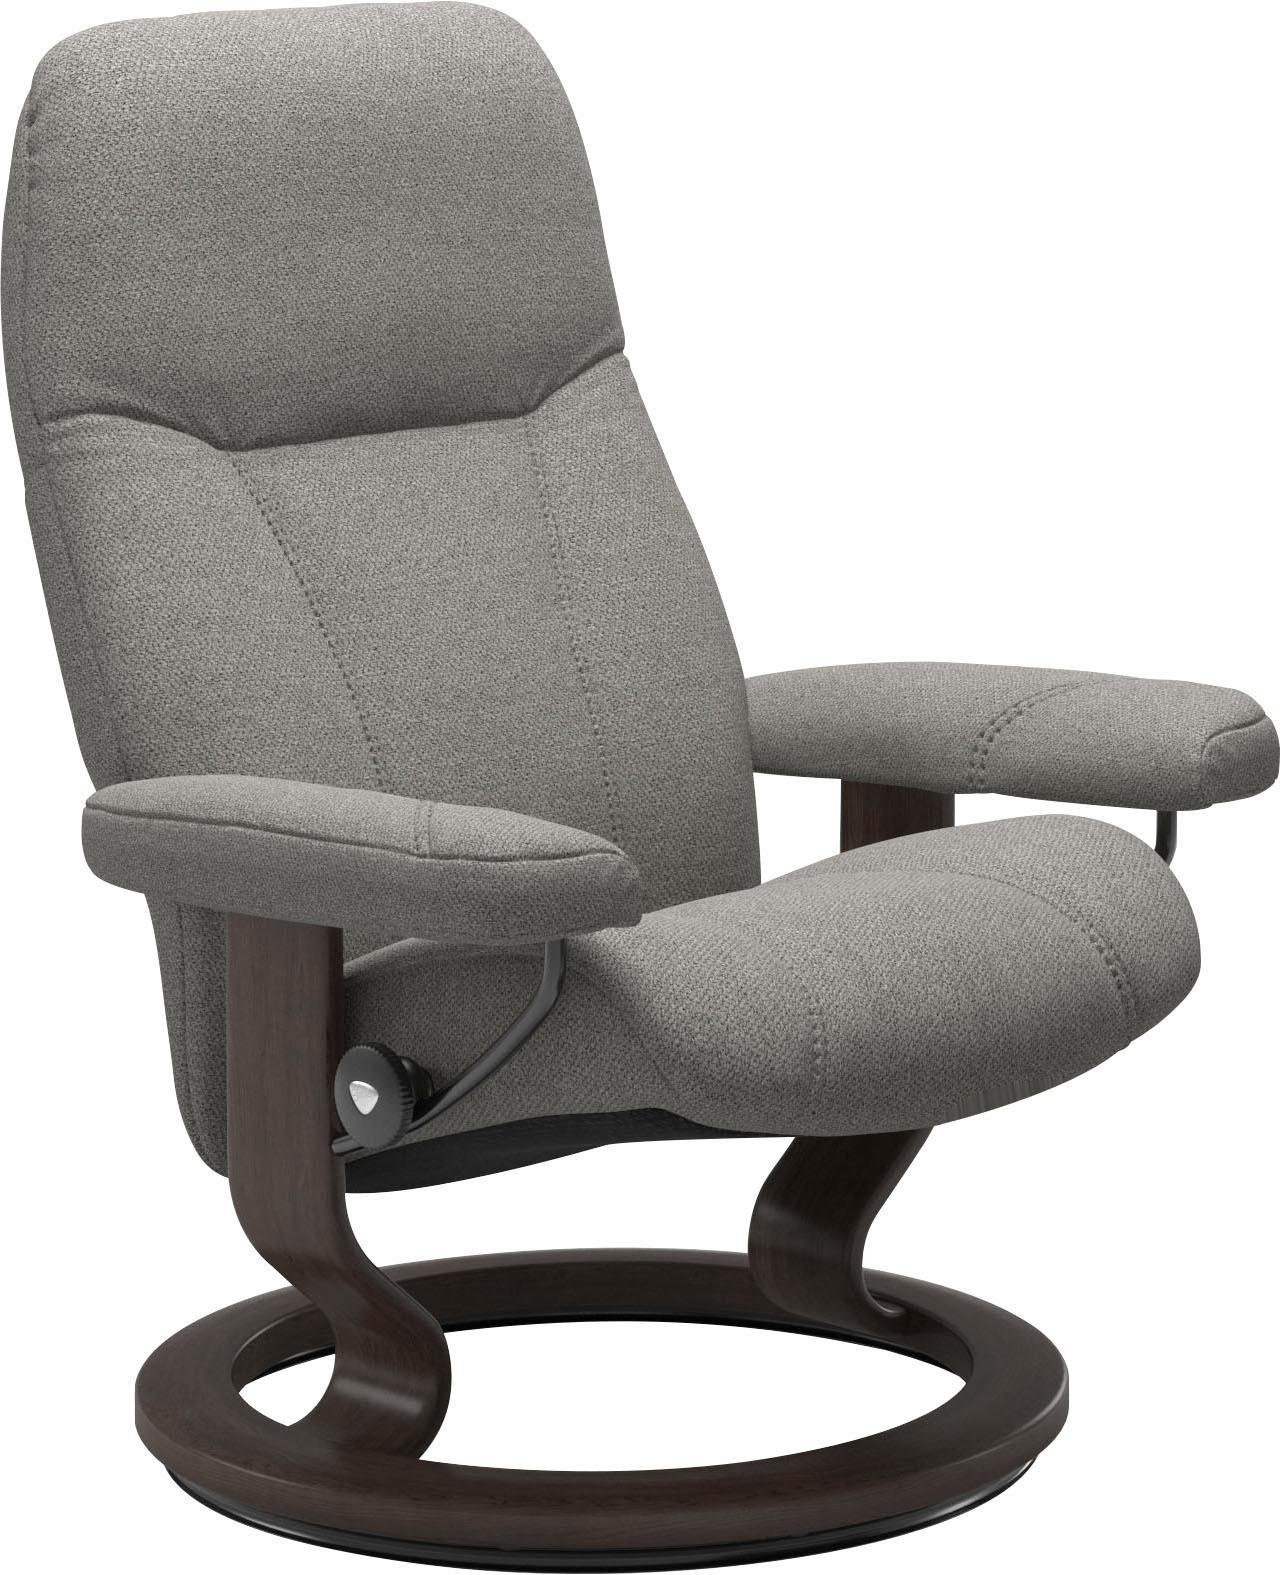 Base, Wenge Consul, Relaxsessel Größe Classic L, Stressless® mit Gestell